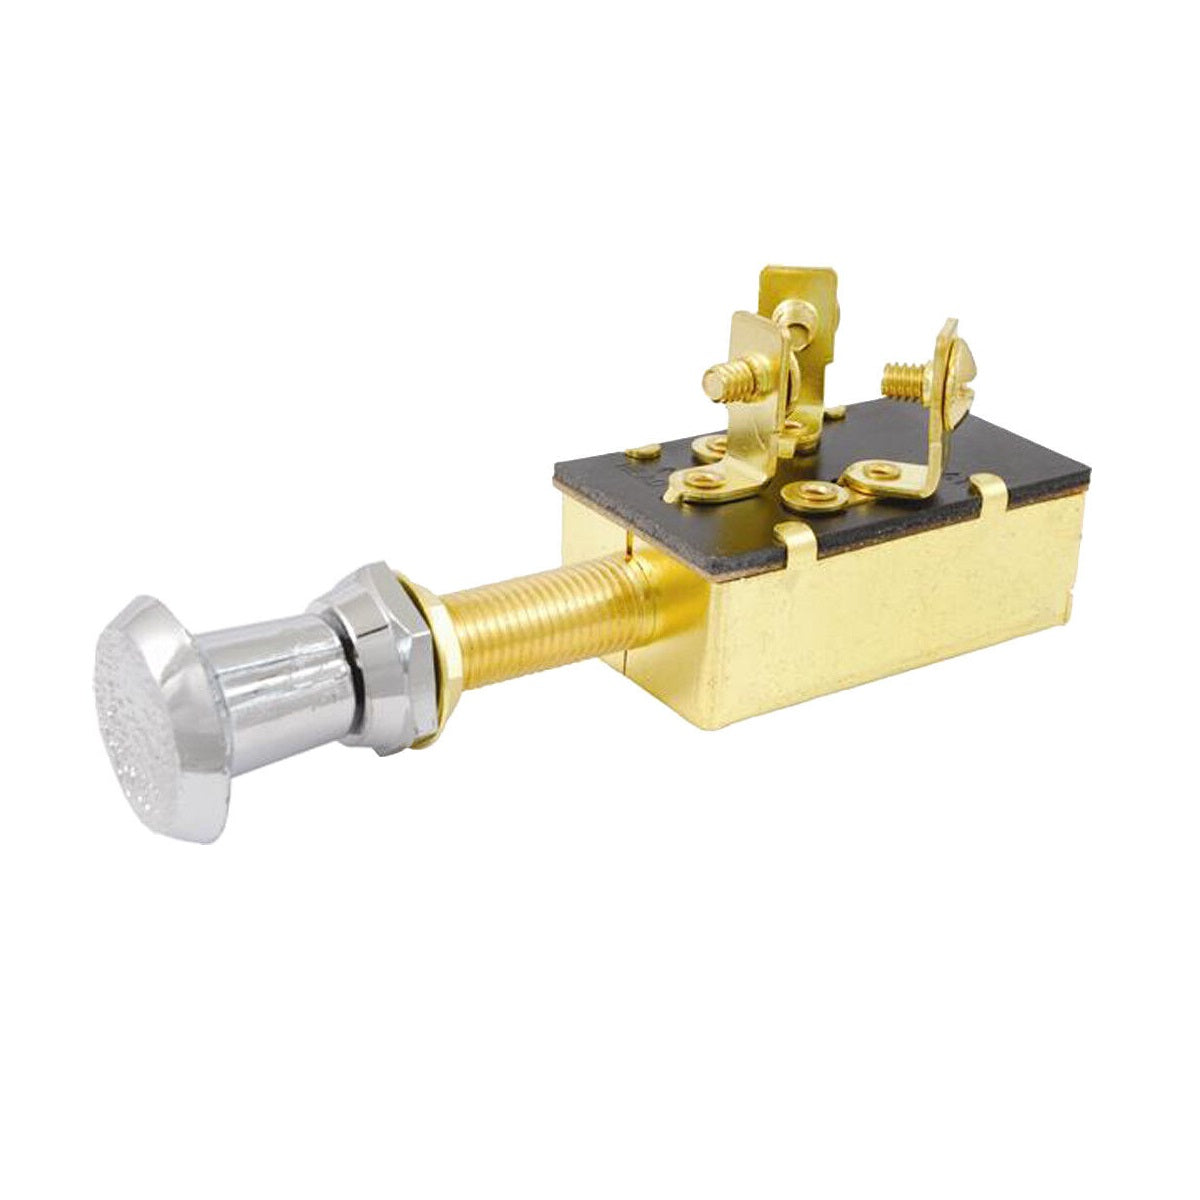 3 Position Push-Pull Switch 30131